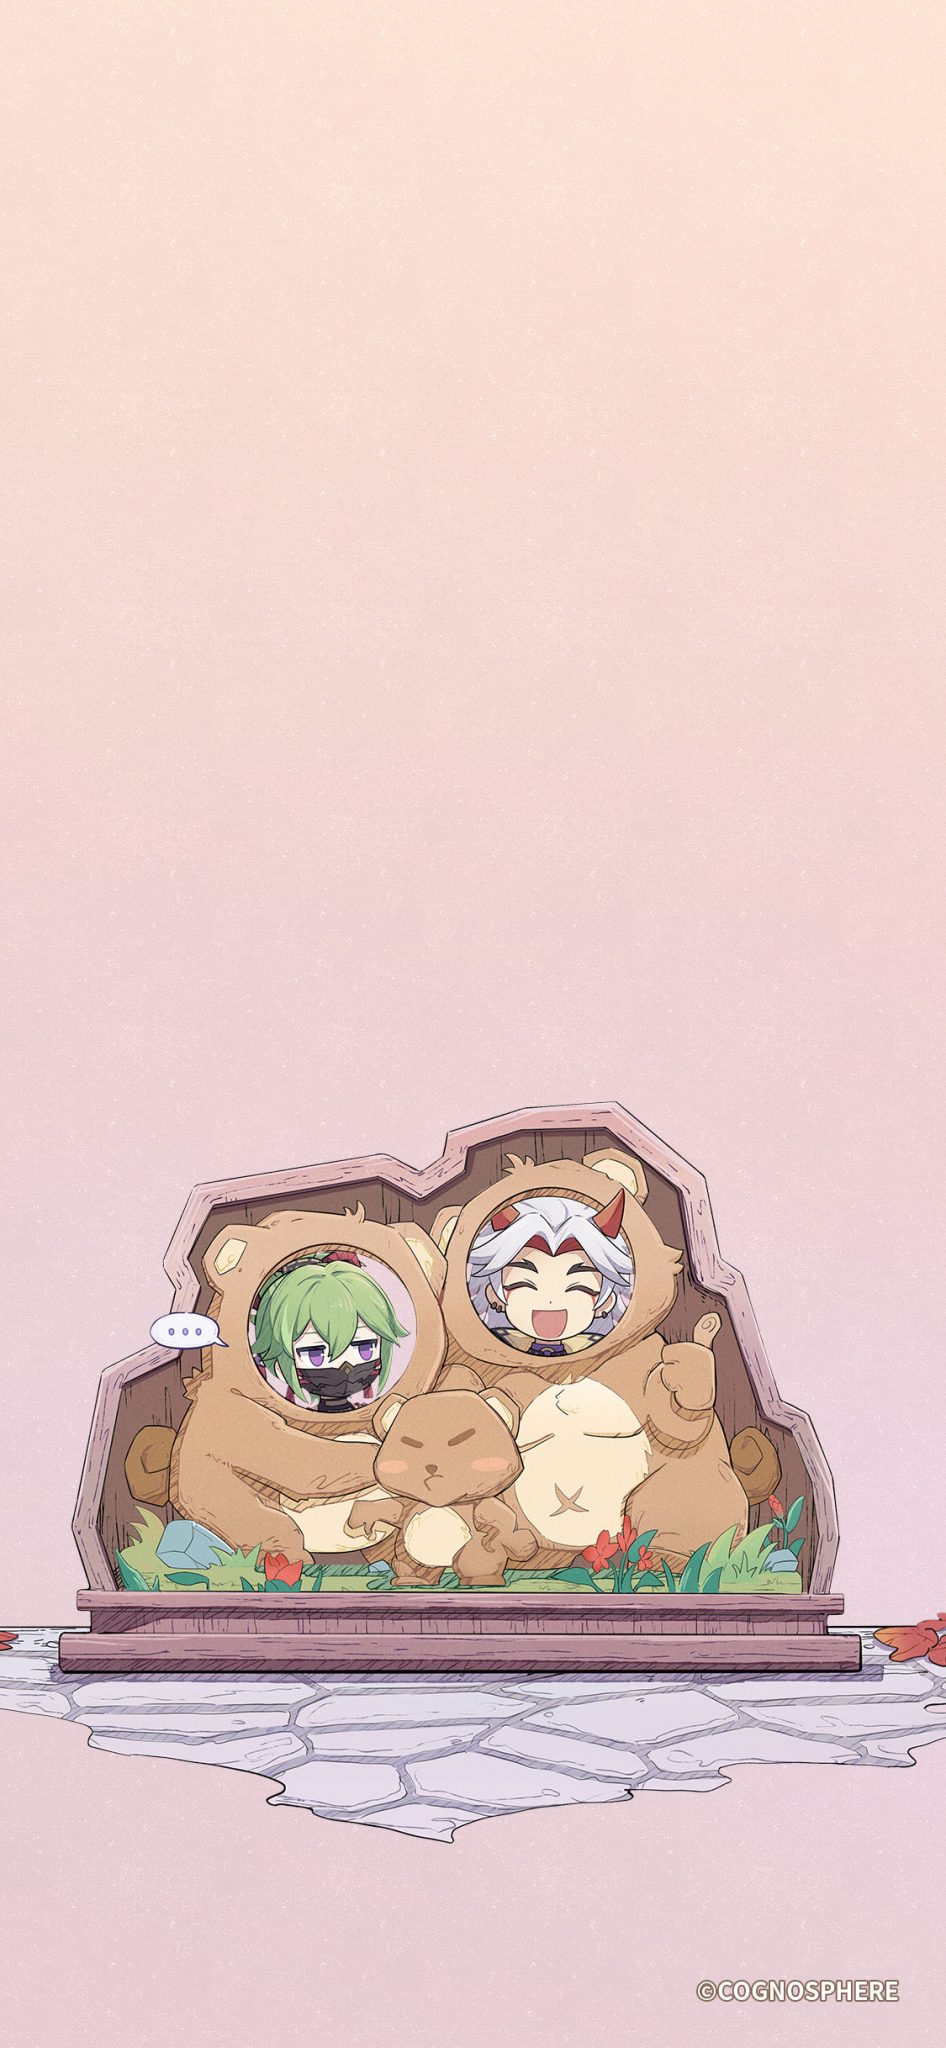 Aesthetic anime phone wallpaper of two anime characters sitting in a bear costume. - Food, profile picture